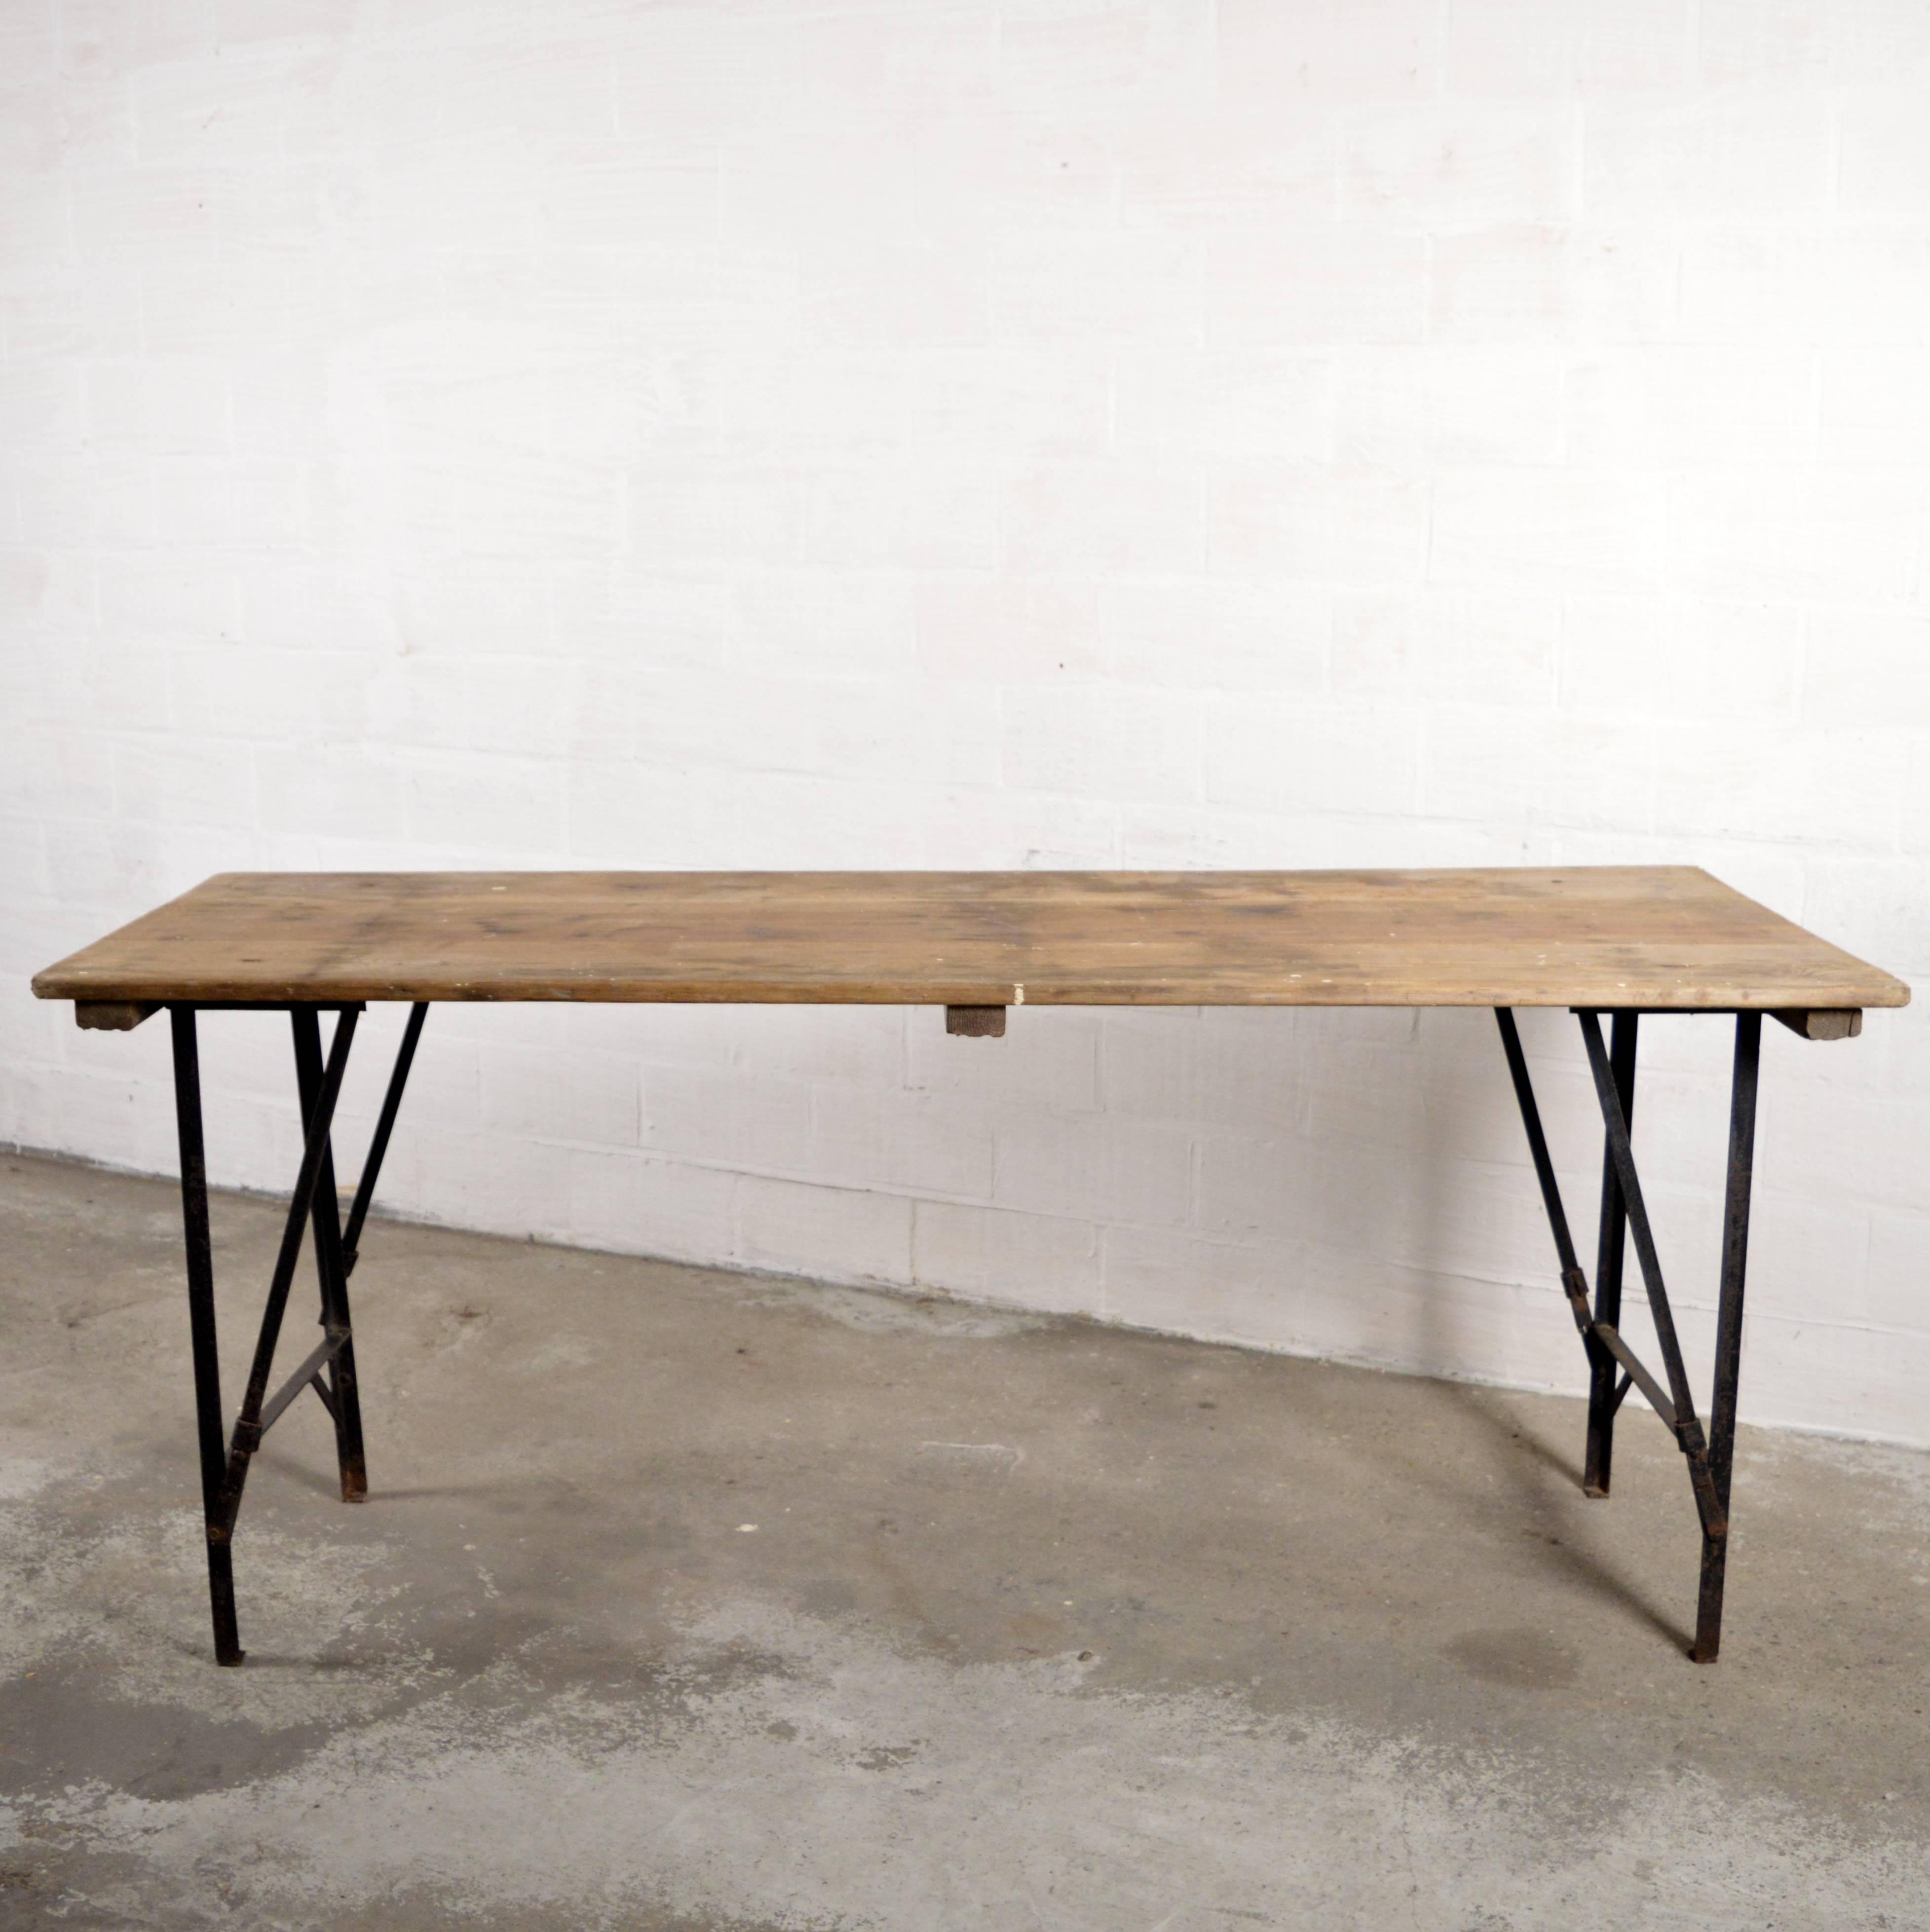 Industrial folding table.
Has a very nice patina.
The black legs give a beautiful look.